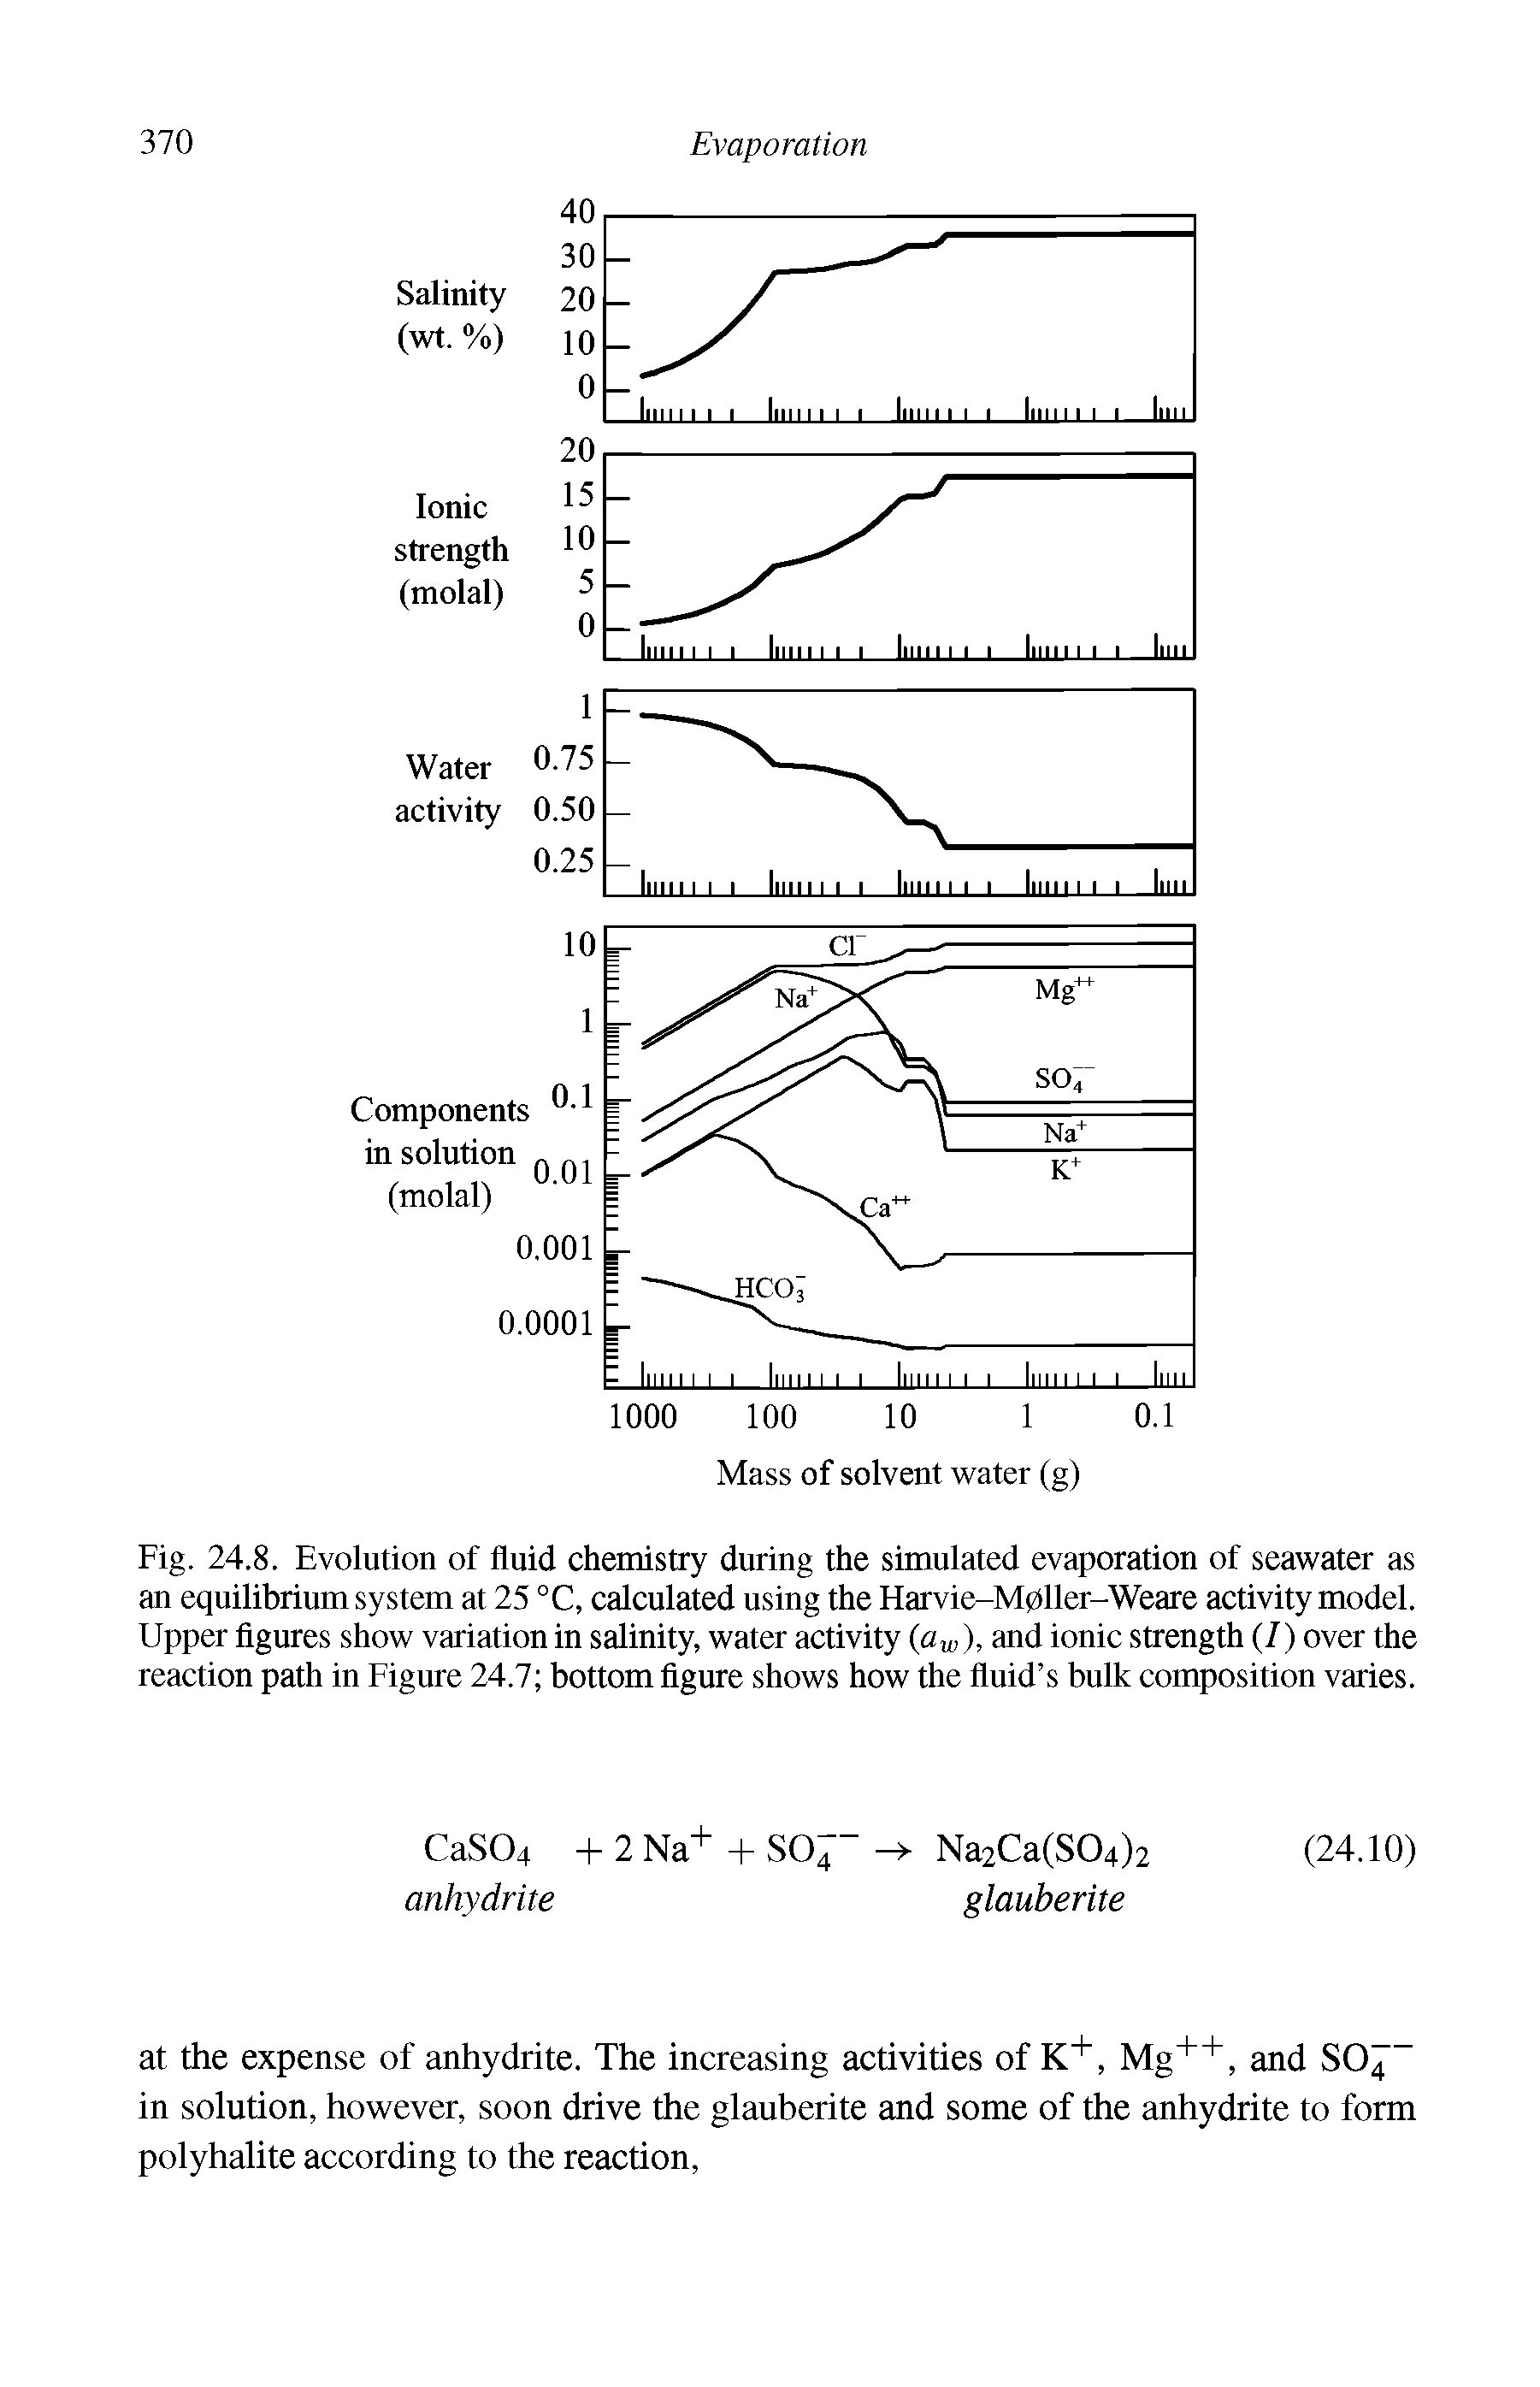 Fig. 24.8. Evolution of fluid chemistry during the simulated evaporation of seawater as an equilibrium system at 25 °C, calculated using the Harvie-Mpller-Weare activity model. Upper figures show variation in salinity, water activity (aw), and ionic strength (/) over the reaction path in Figure 24.7 bottom figure shows how the fluid s bulk composition varies.